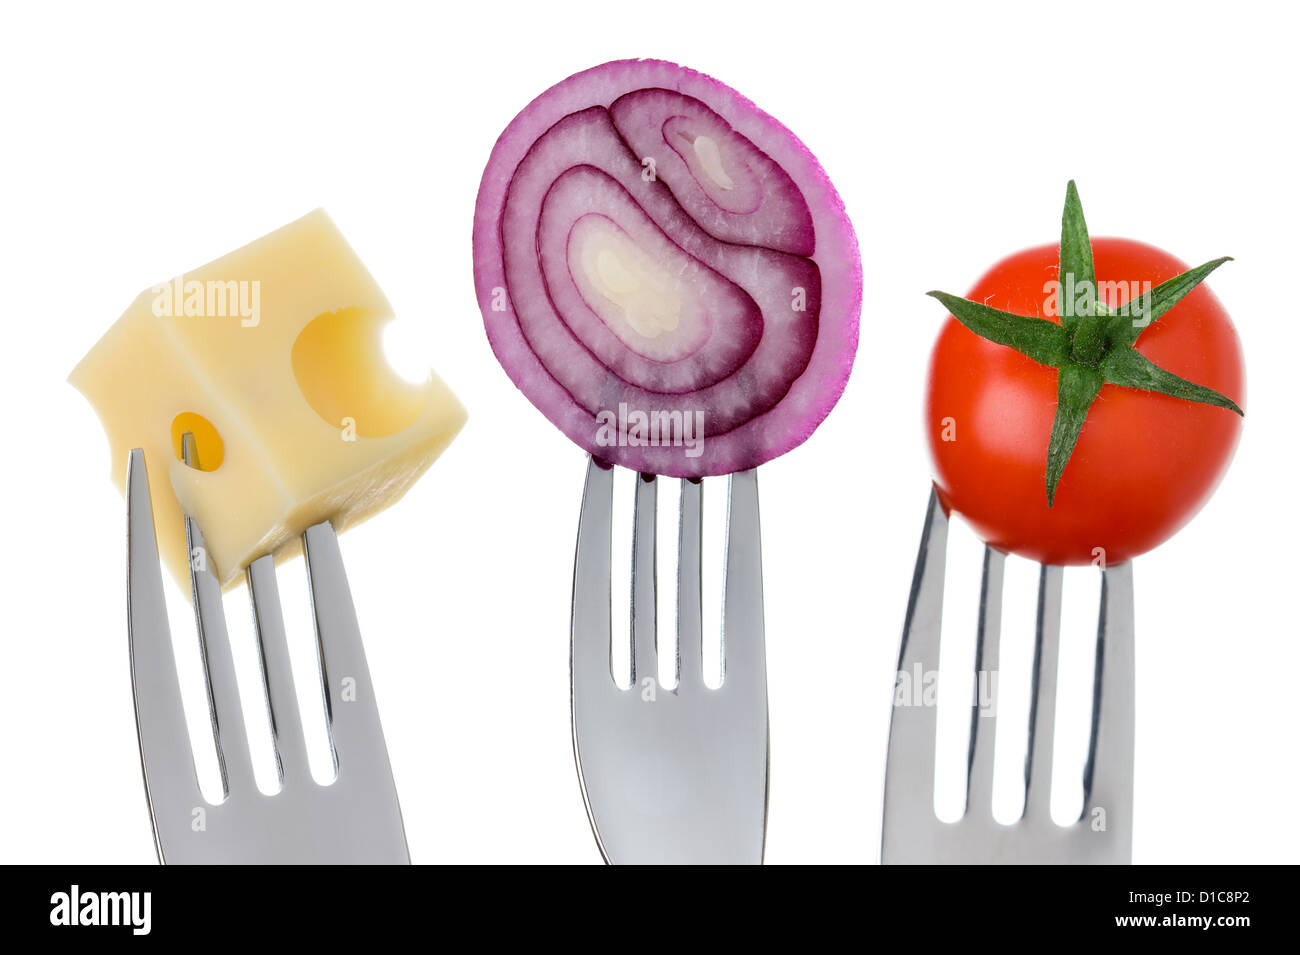 emmental cheese onion and tomato on forks against white background Stock Photo